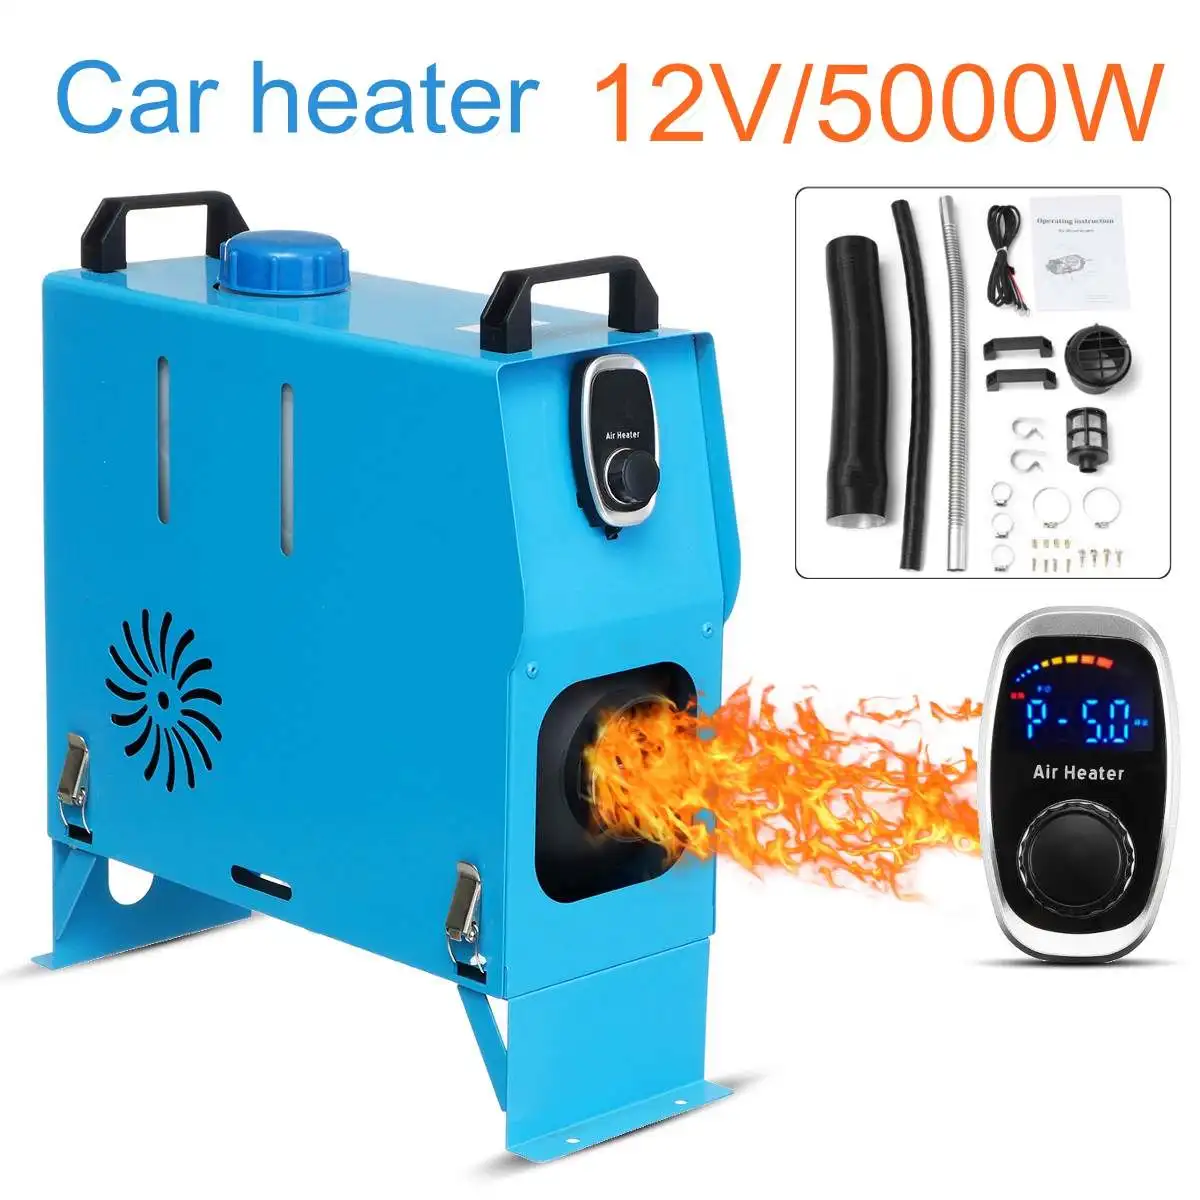 

All In One 5000W Air Parking diesels Heater 5KW 12V Car Heater For Trucks Motor-Homes Boats Bus +Digital Knob Switch